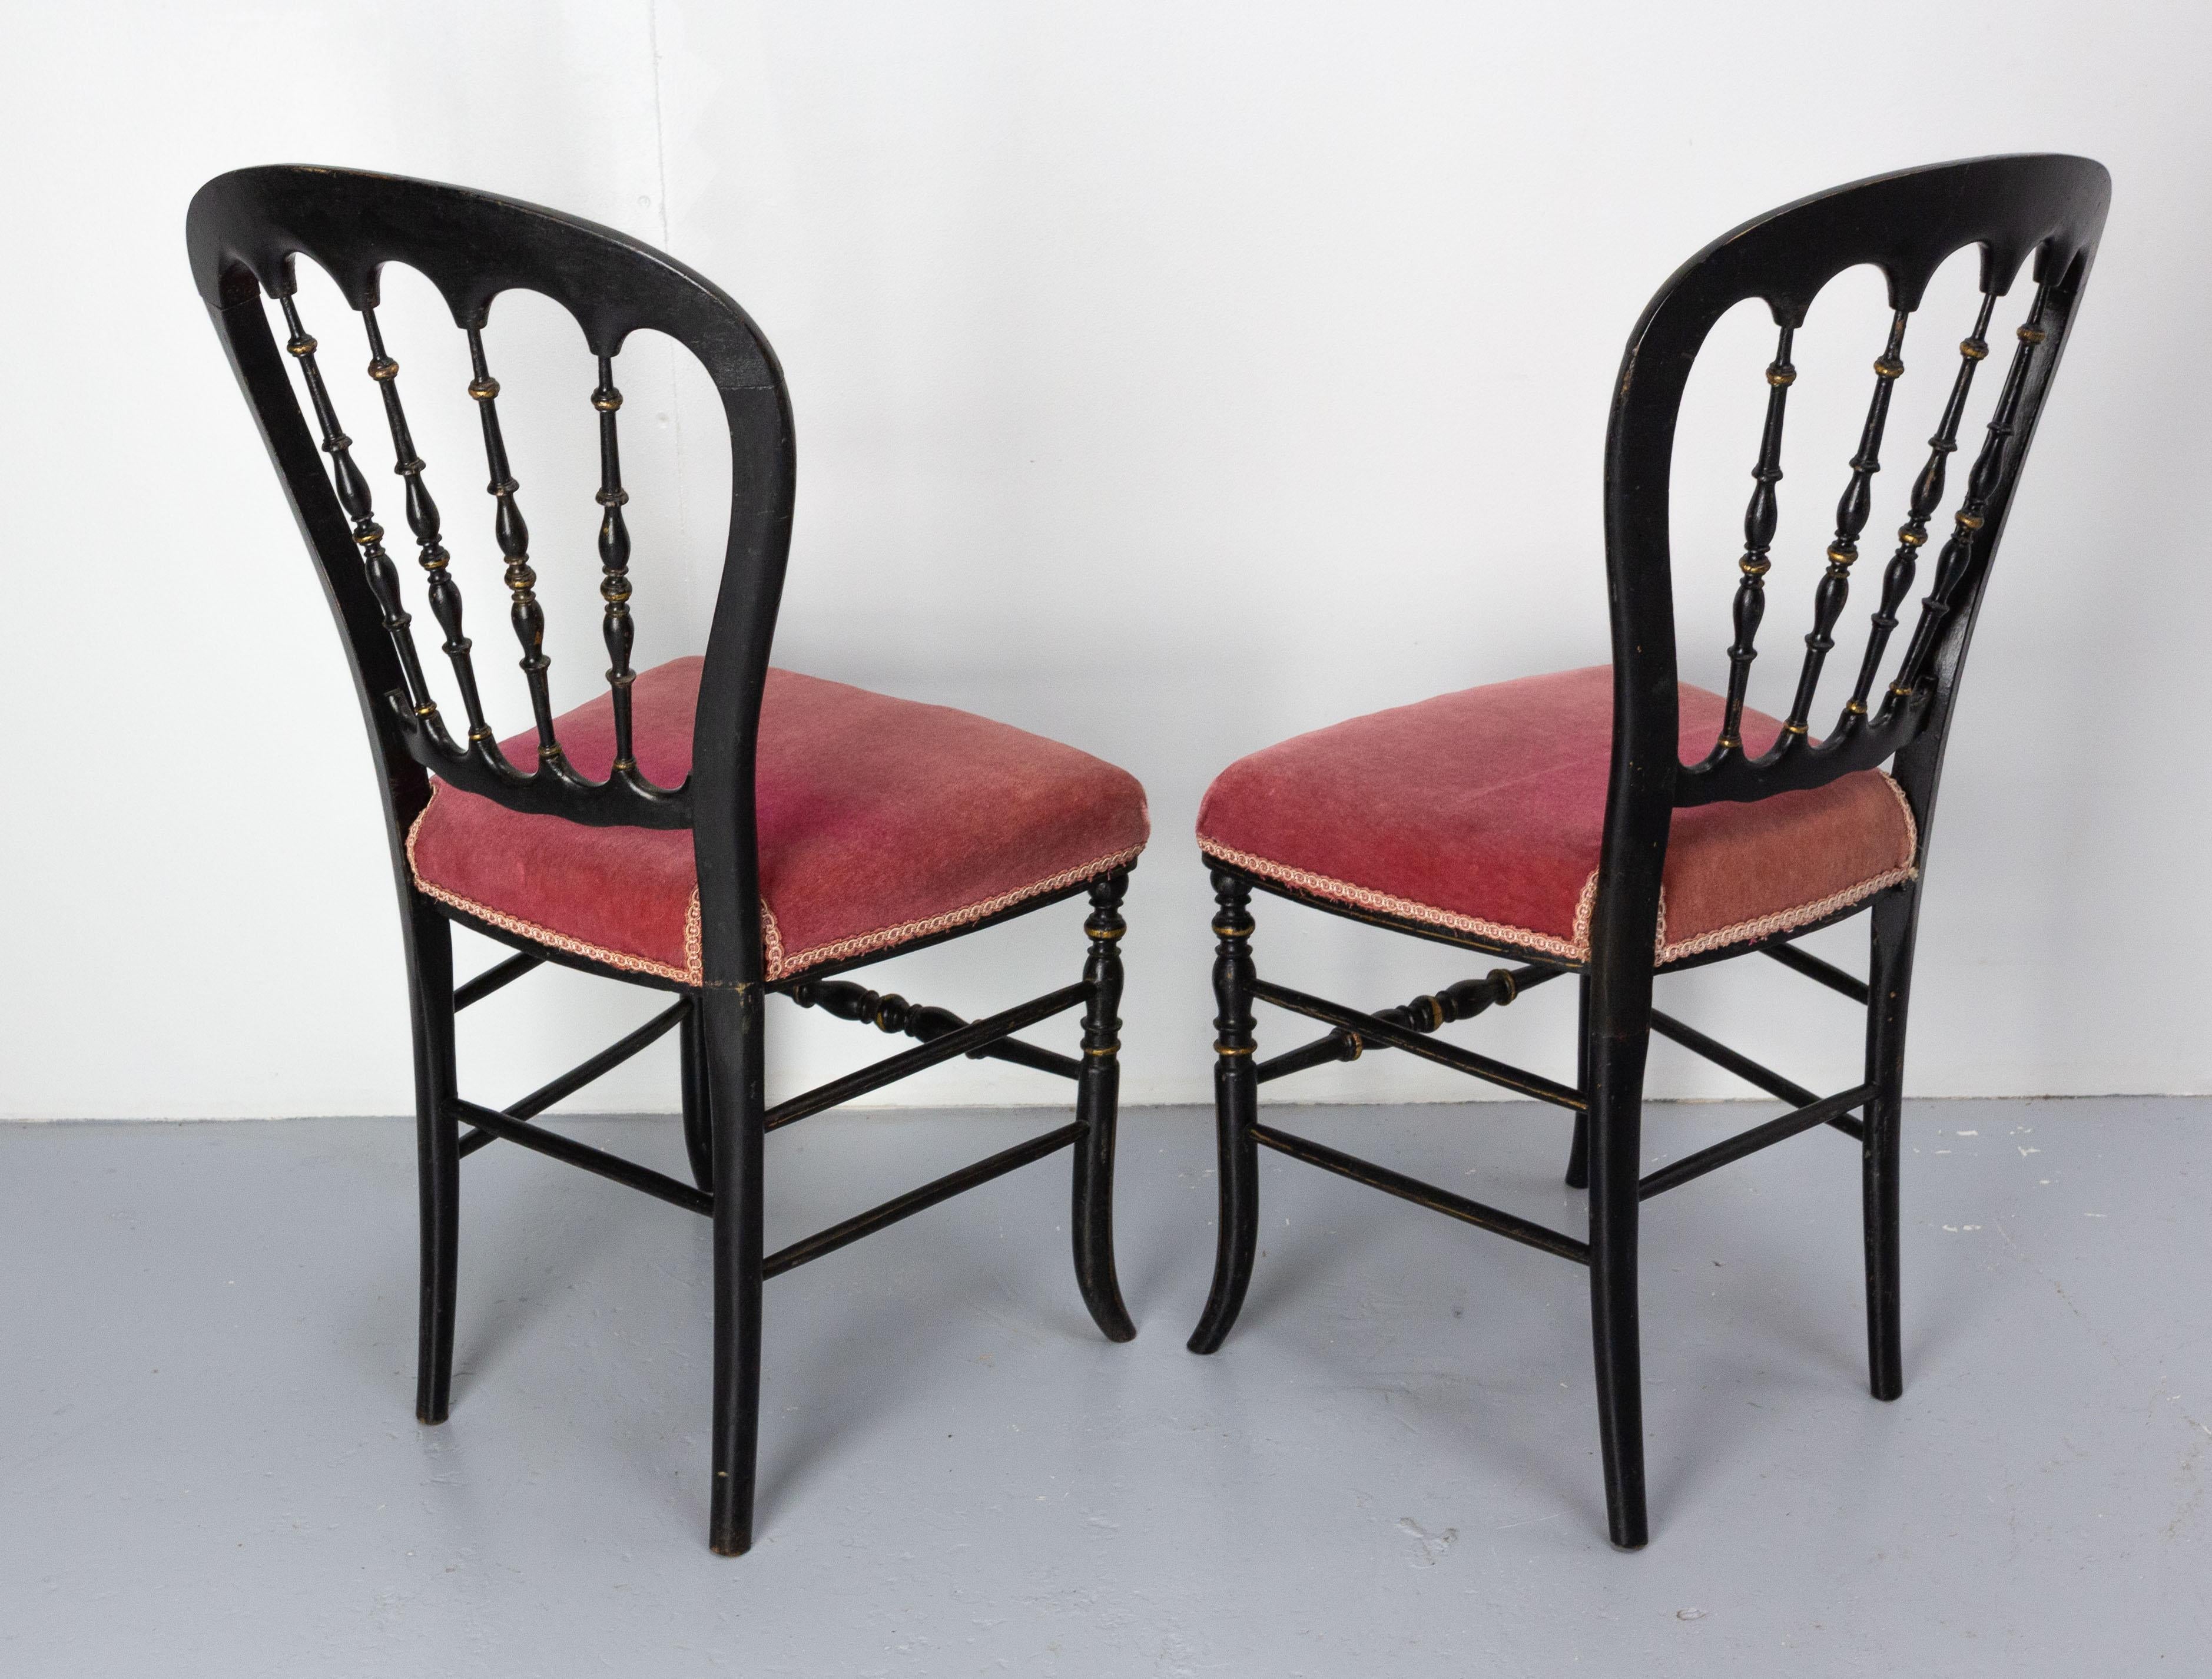 Pair of Napoleon III Chairs Fabric and Painted Wood, French, Late 19th Century For Sale 1